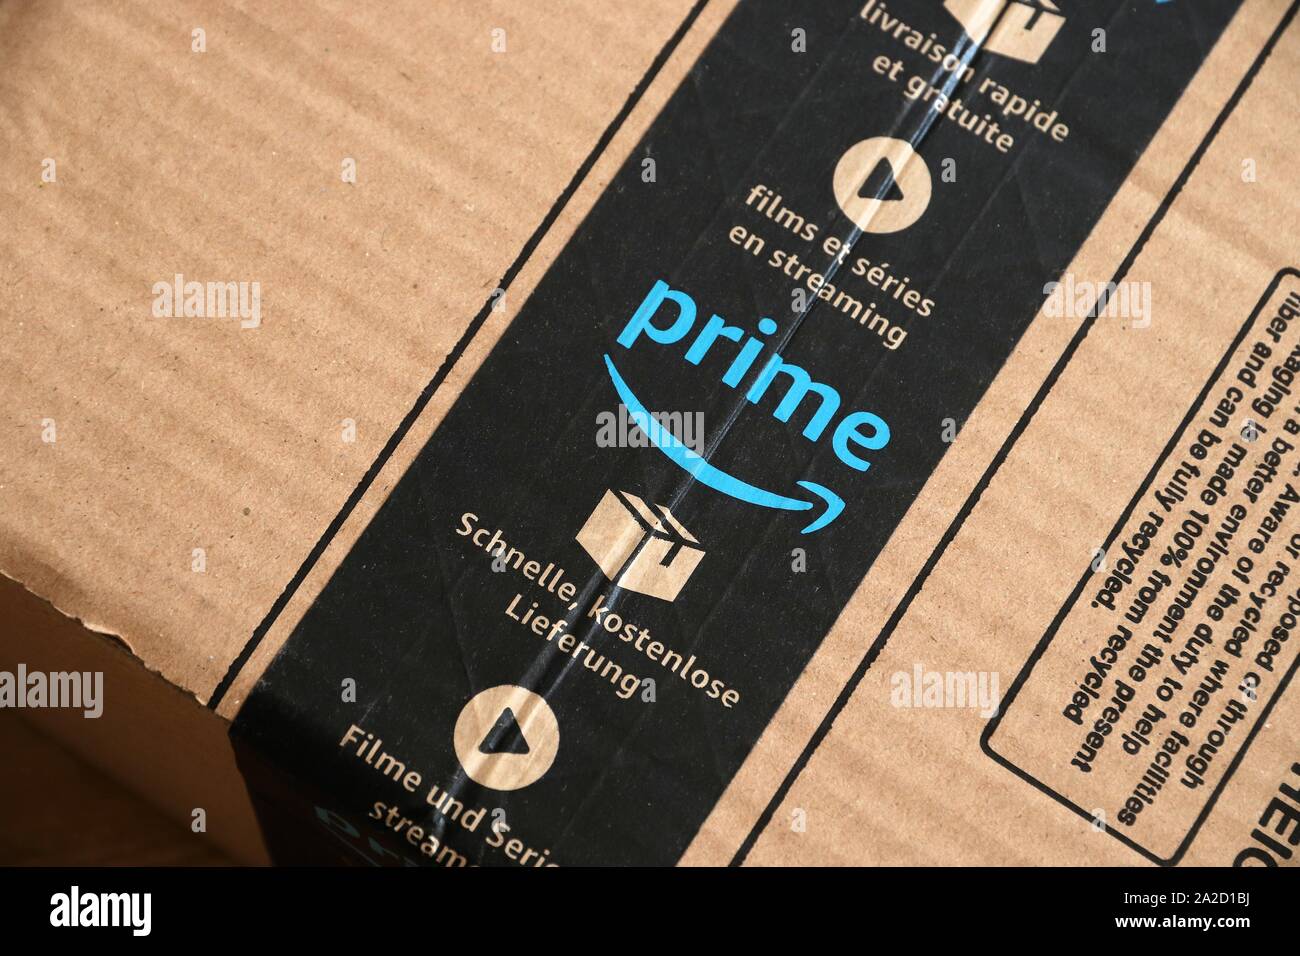 WARSAW, POLAND - AUGUST 23, 2019: Amazon Prime online store order delivered  package in Europe. Amazon is considered one of the Big Four global tech co  Stock Photo - Alamy